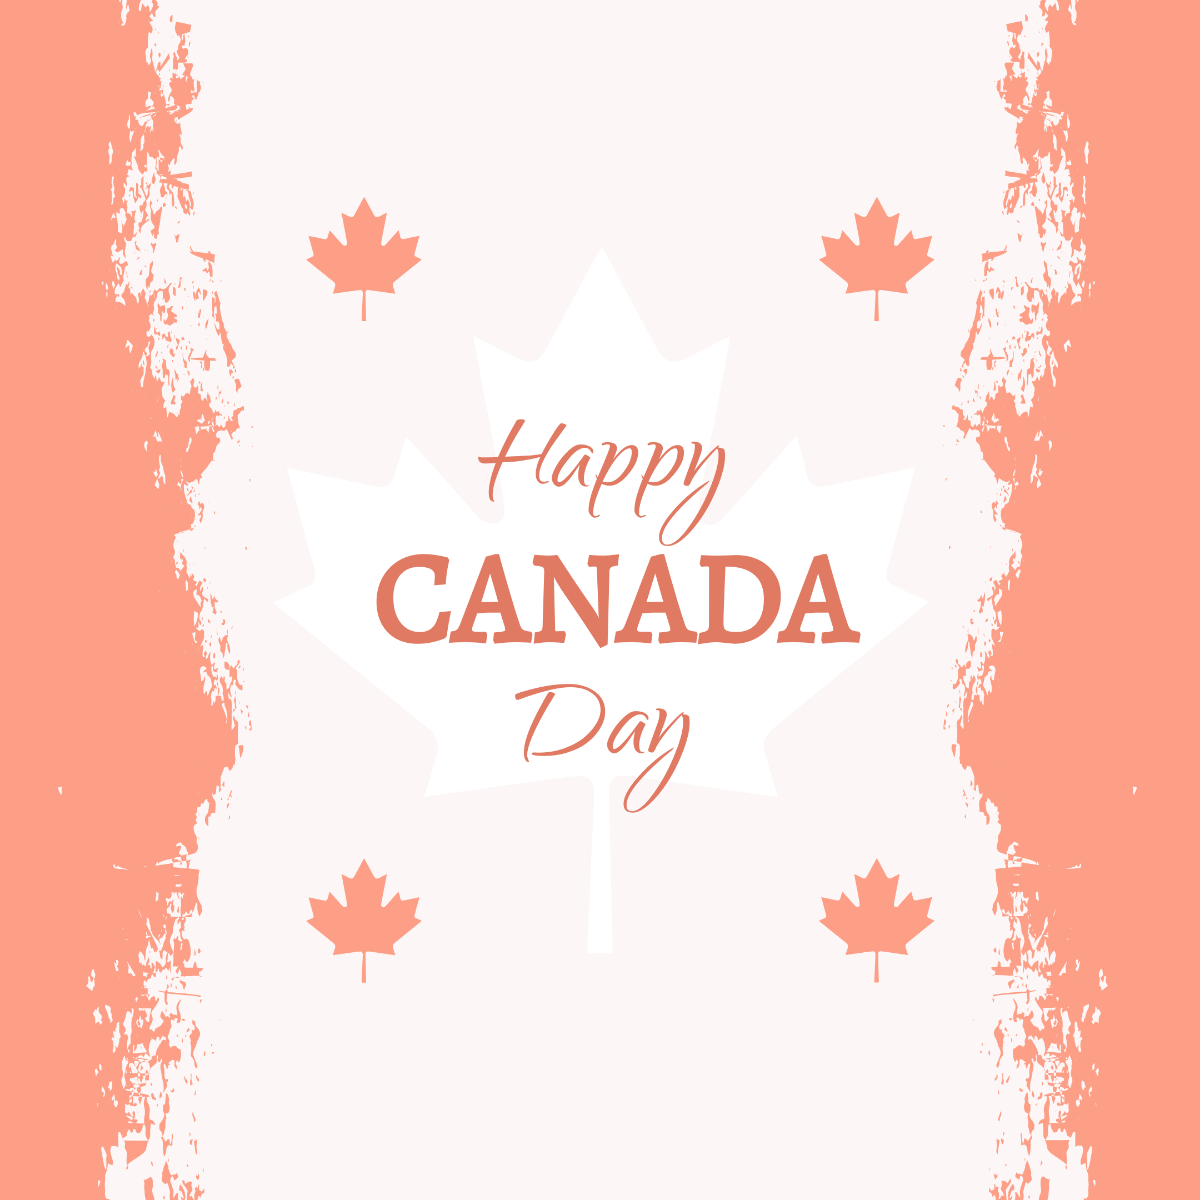 Free Rustic Happy Canada Day Template